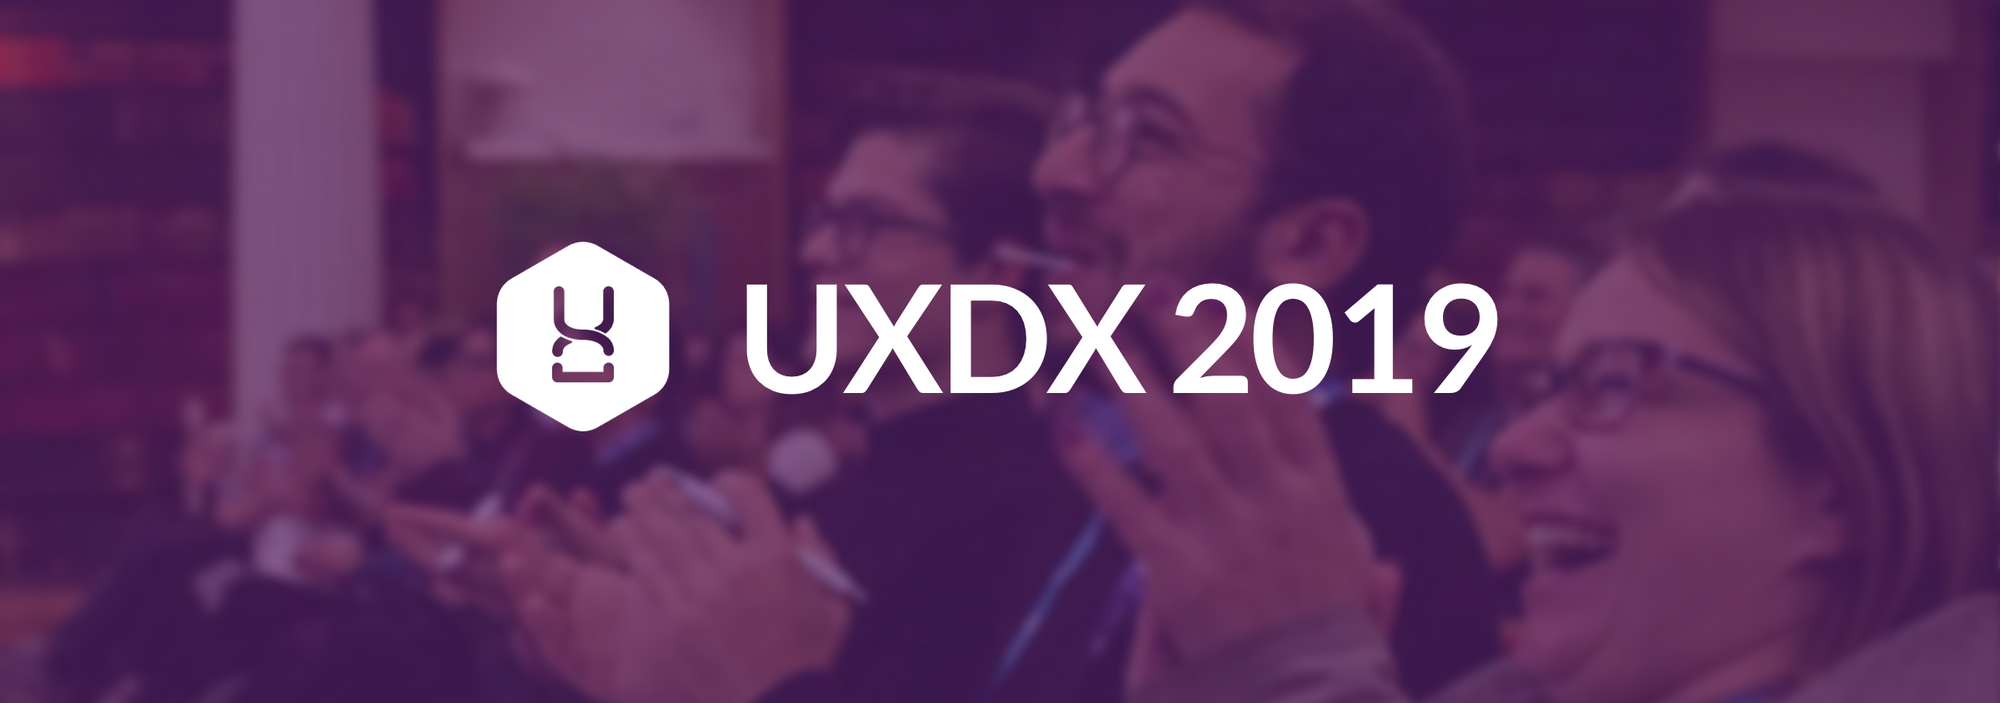 What to Expect at UXDX 2019